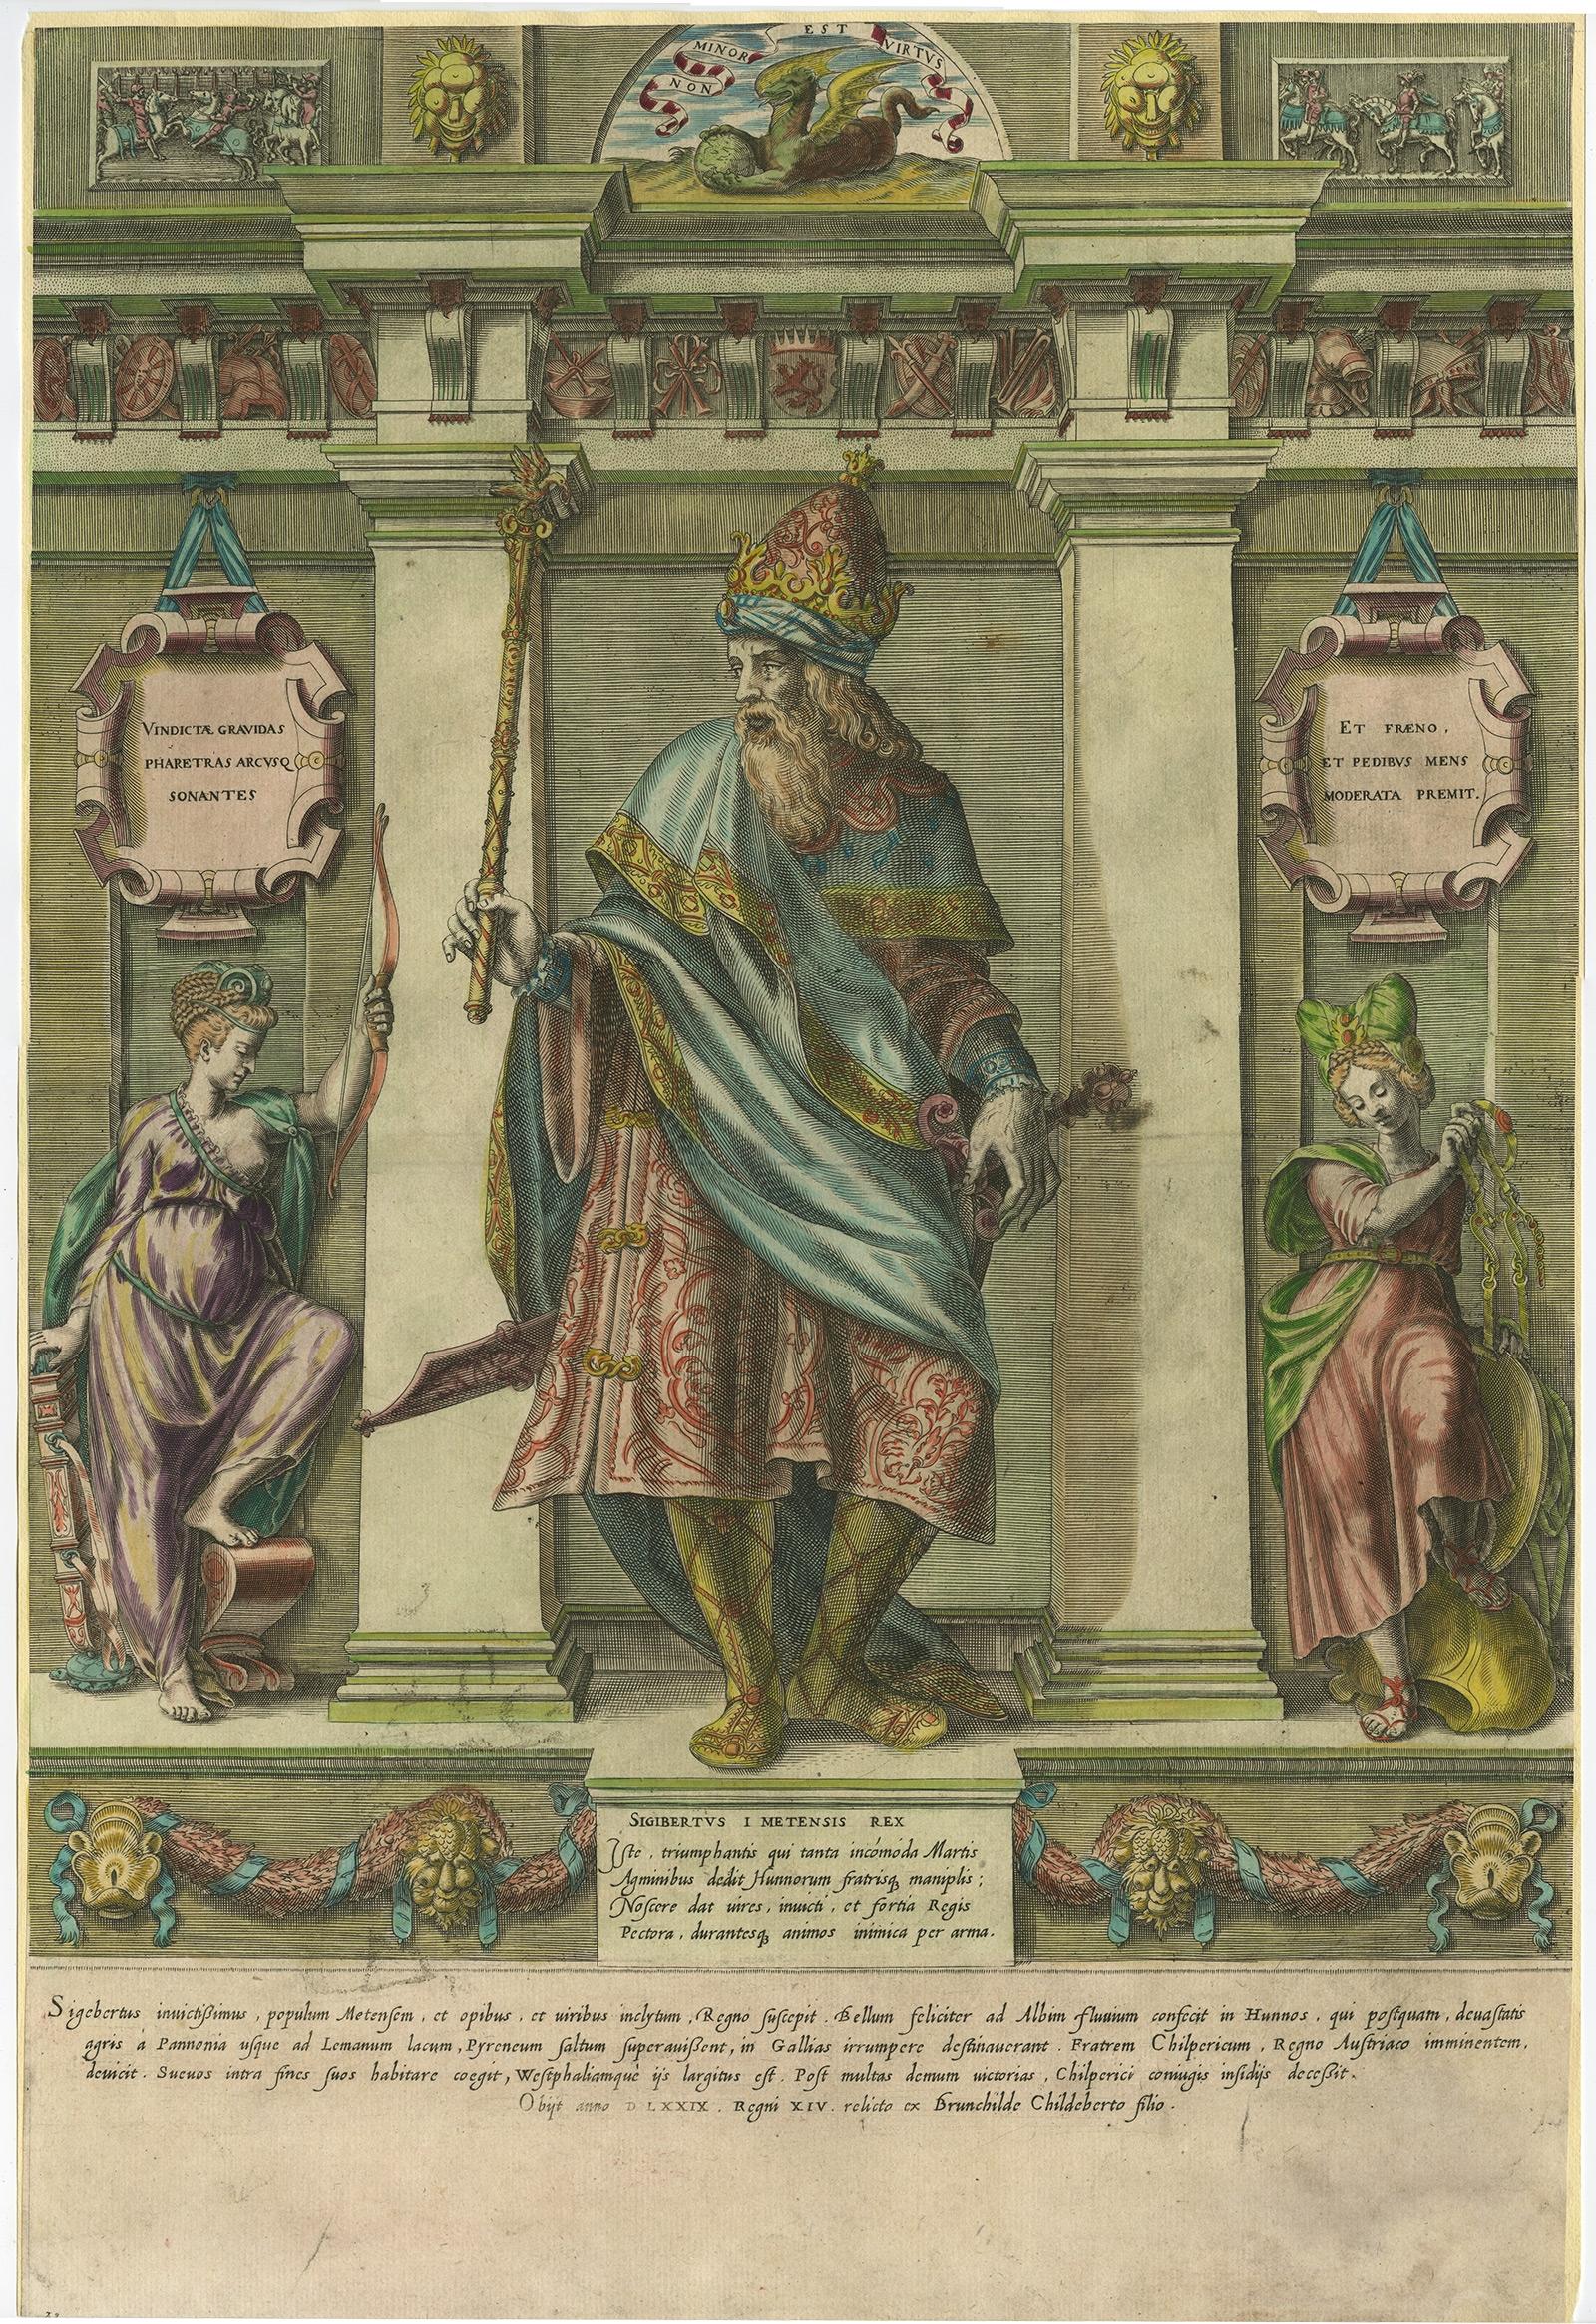 Antique print, titled: 'Sigibertus I Metensis Rex (…)' 


Original and very rare antique print showing a full length portrait of Sigebert I (c. 535 – c. 575), the Germanic king of Austrasia from the death of his father in 561 to his own death. He